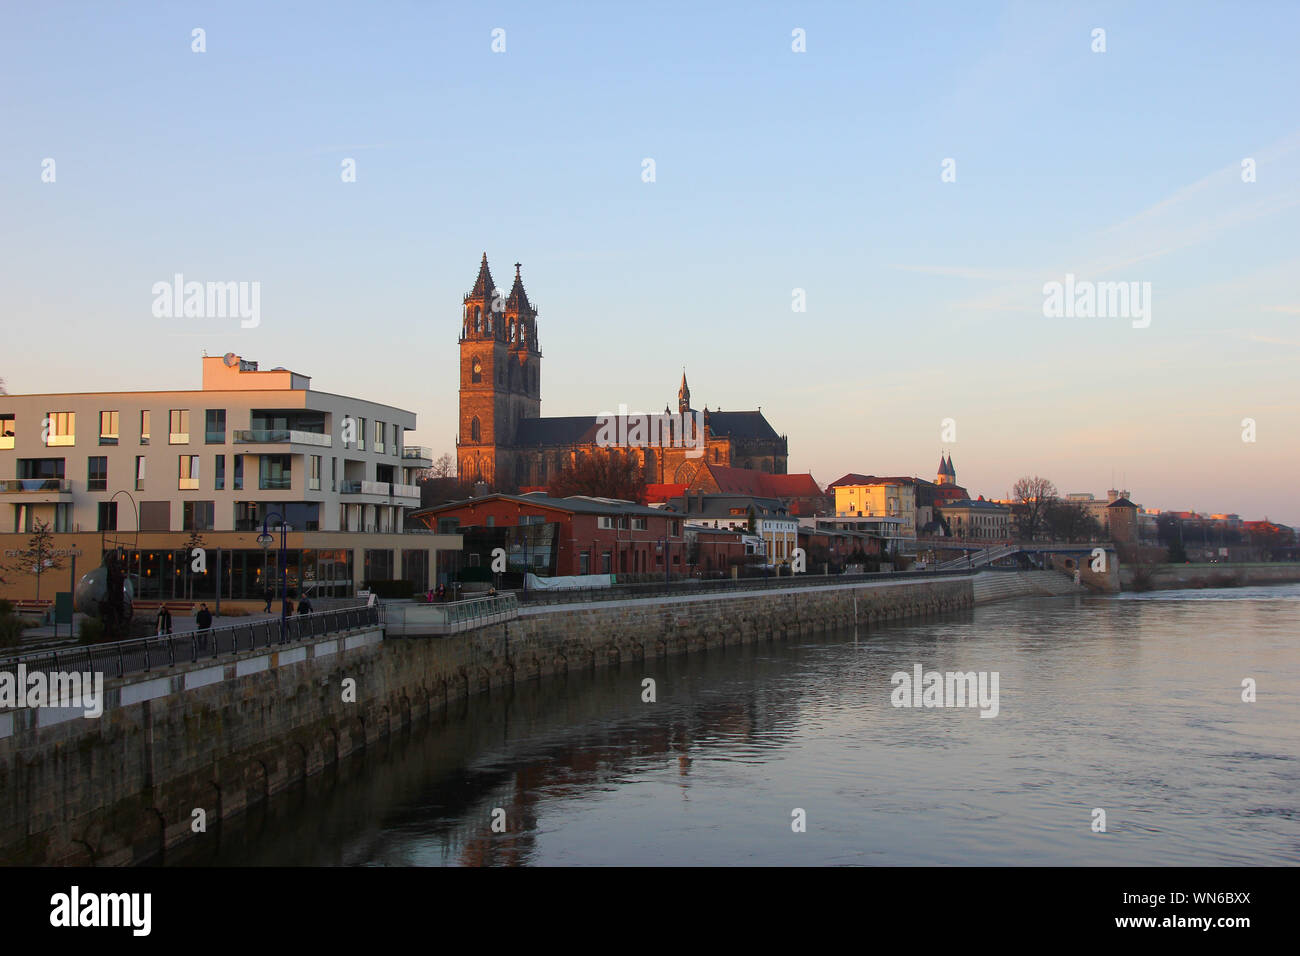 View Of River With Magdeburg Cathedral In Background Stock Photo